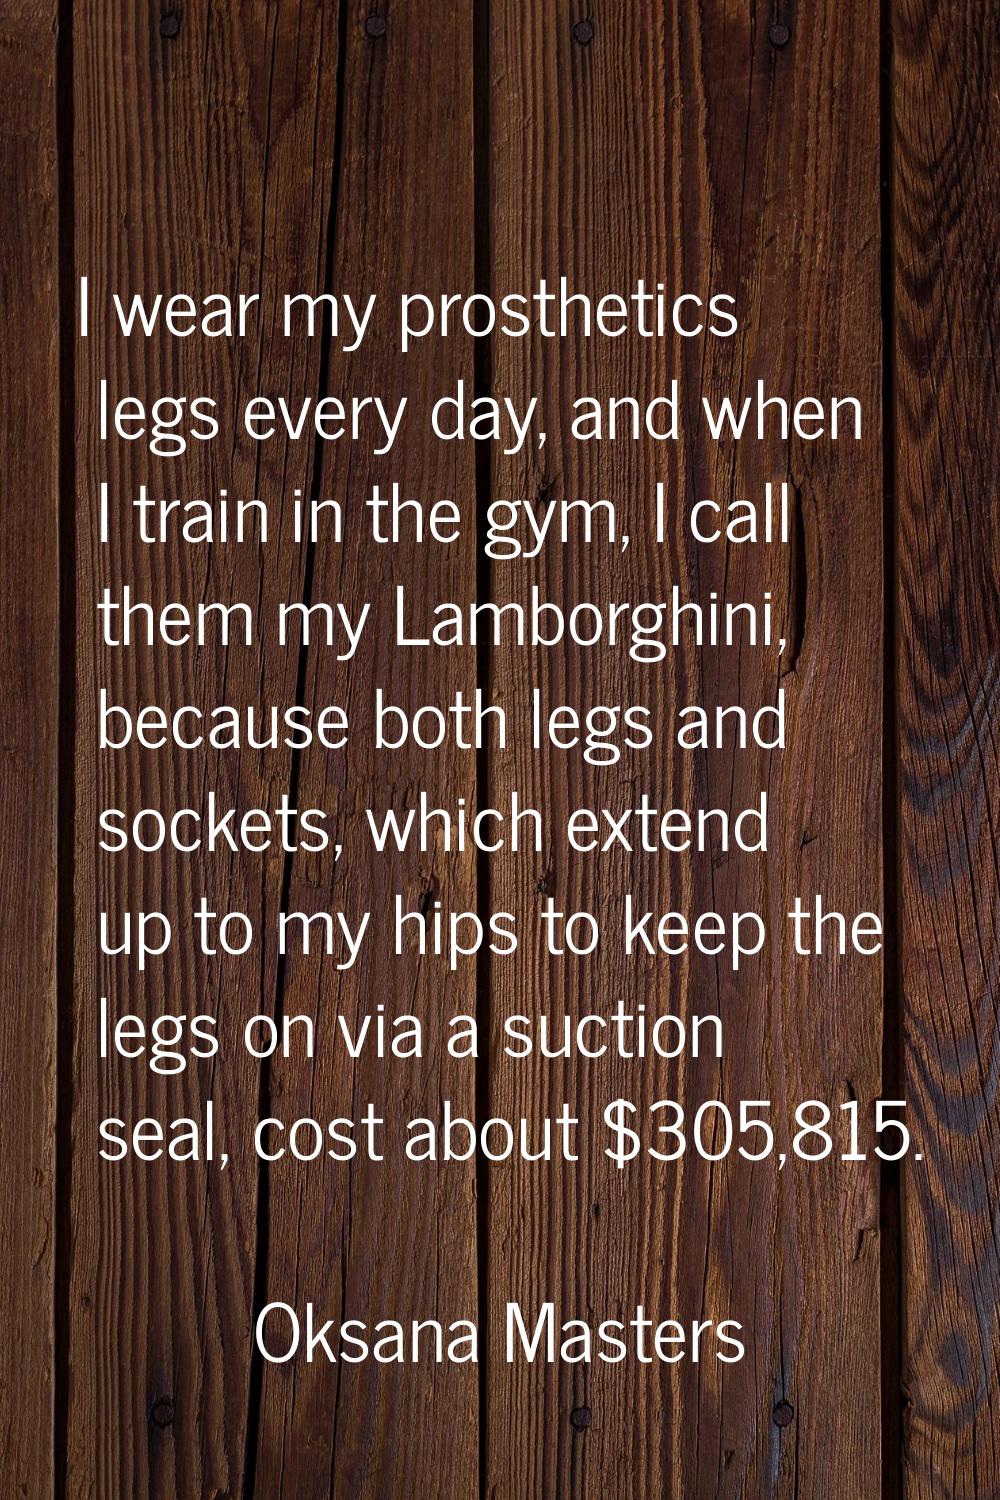 I wear my prosthetics legs every day, and when I train in the gym, I call them my Lamborghini, beca